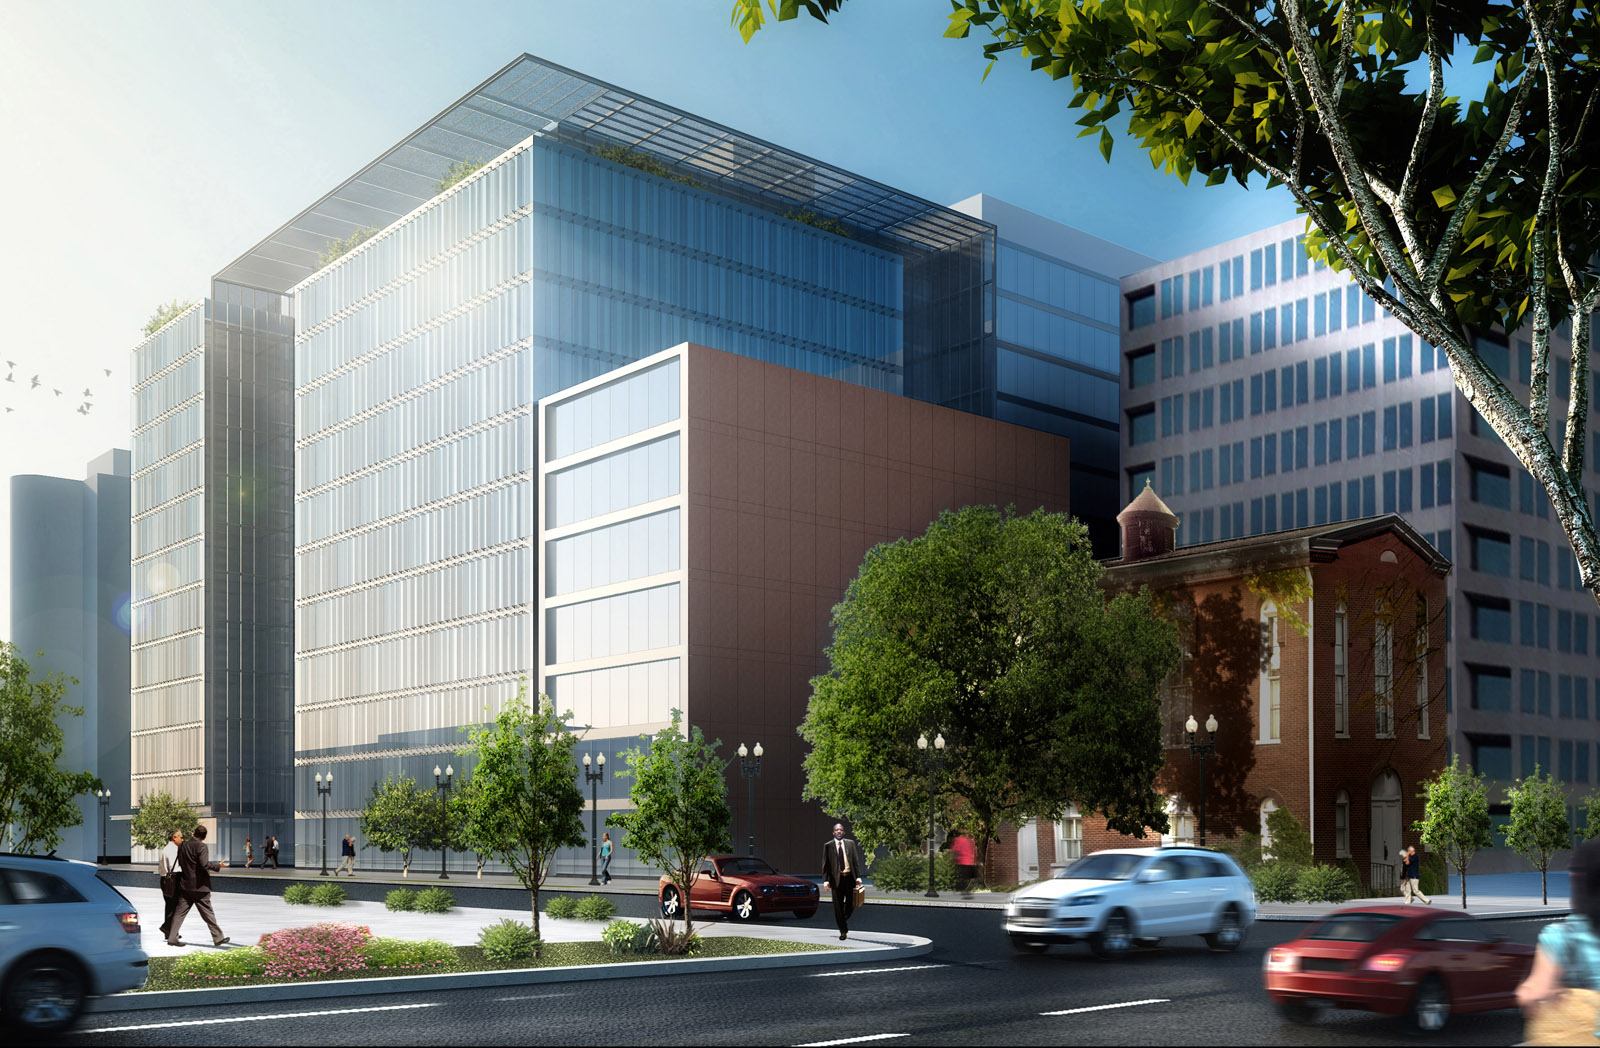 A view of the planned building at 200 F Street  seen from 3rd and F streets. The building will be constructed as part of the new Capitol Crossing development. The $1.3 billion project will include 5 structures and will be built on top of Interstate 395 (Courtesy Property Group Partners)